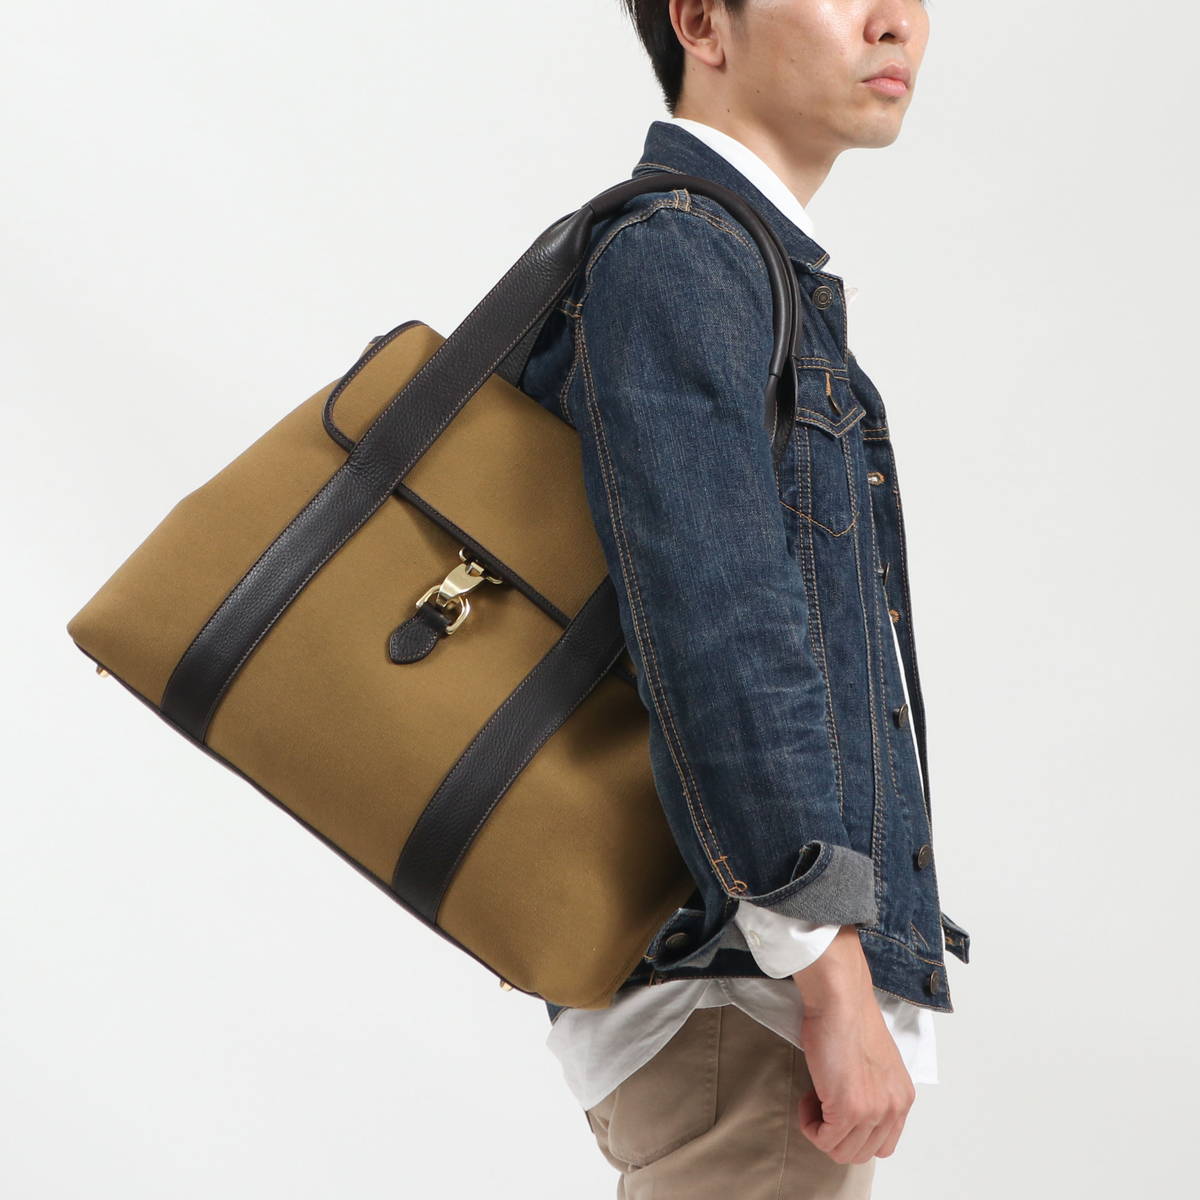 S.MANO エスマーノ FLAP TOTE トートバッグ｜【正規販売店】カバン